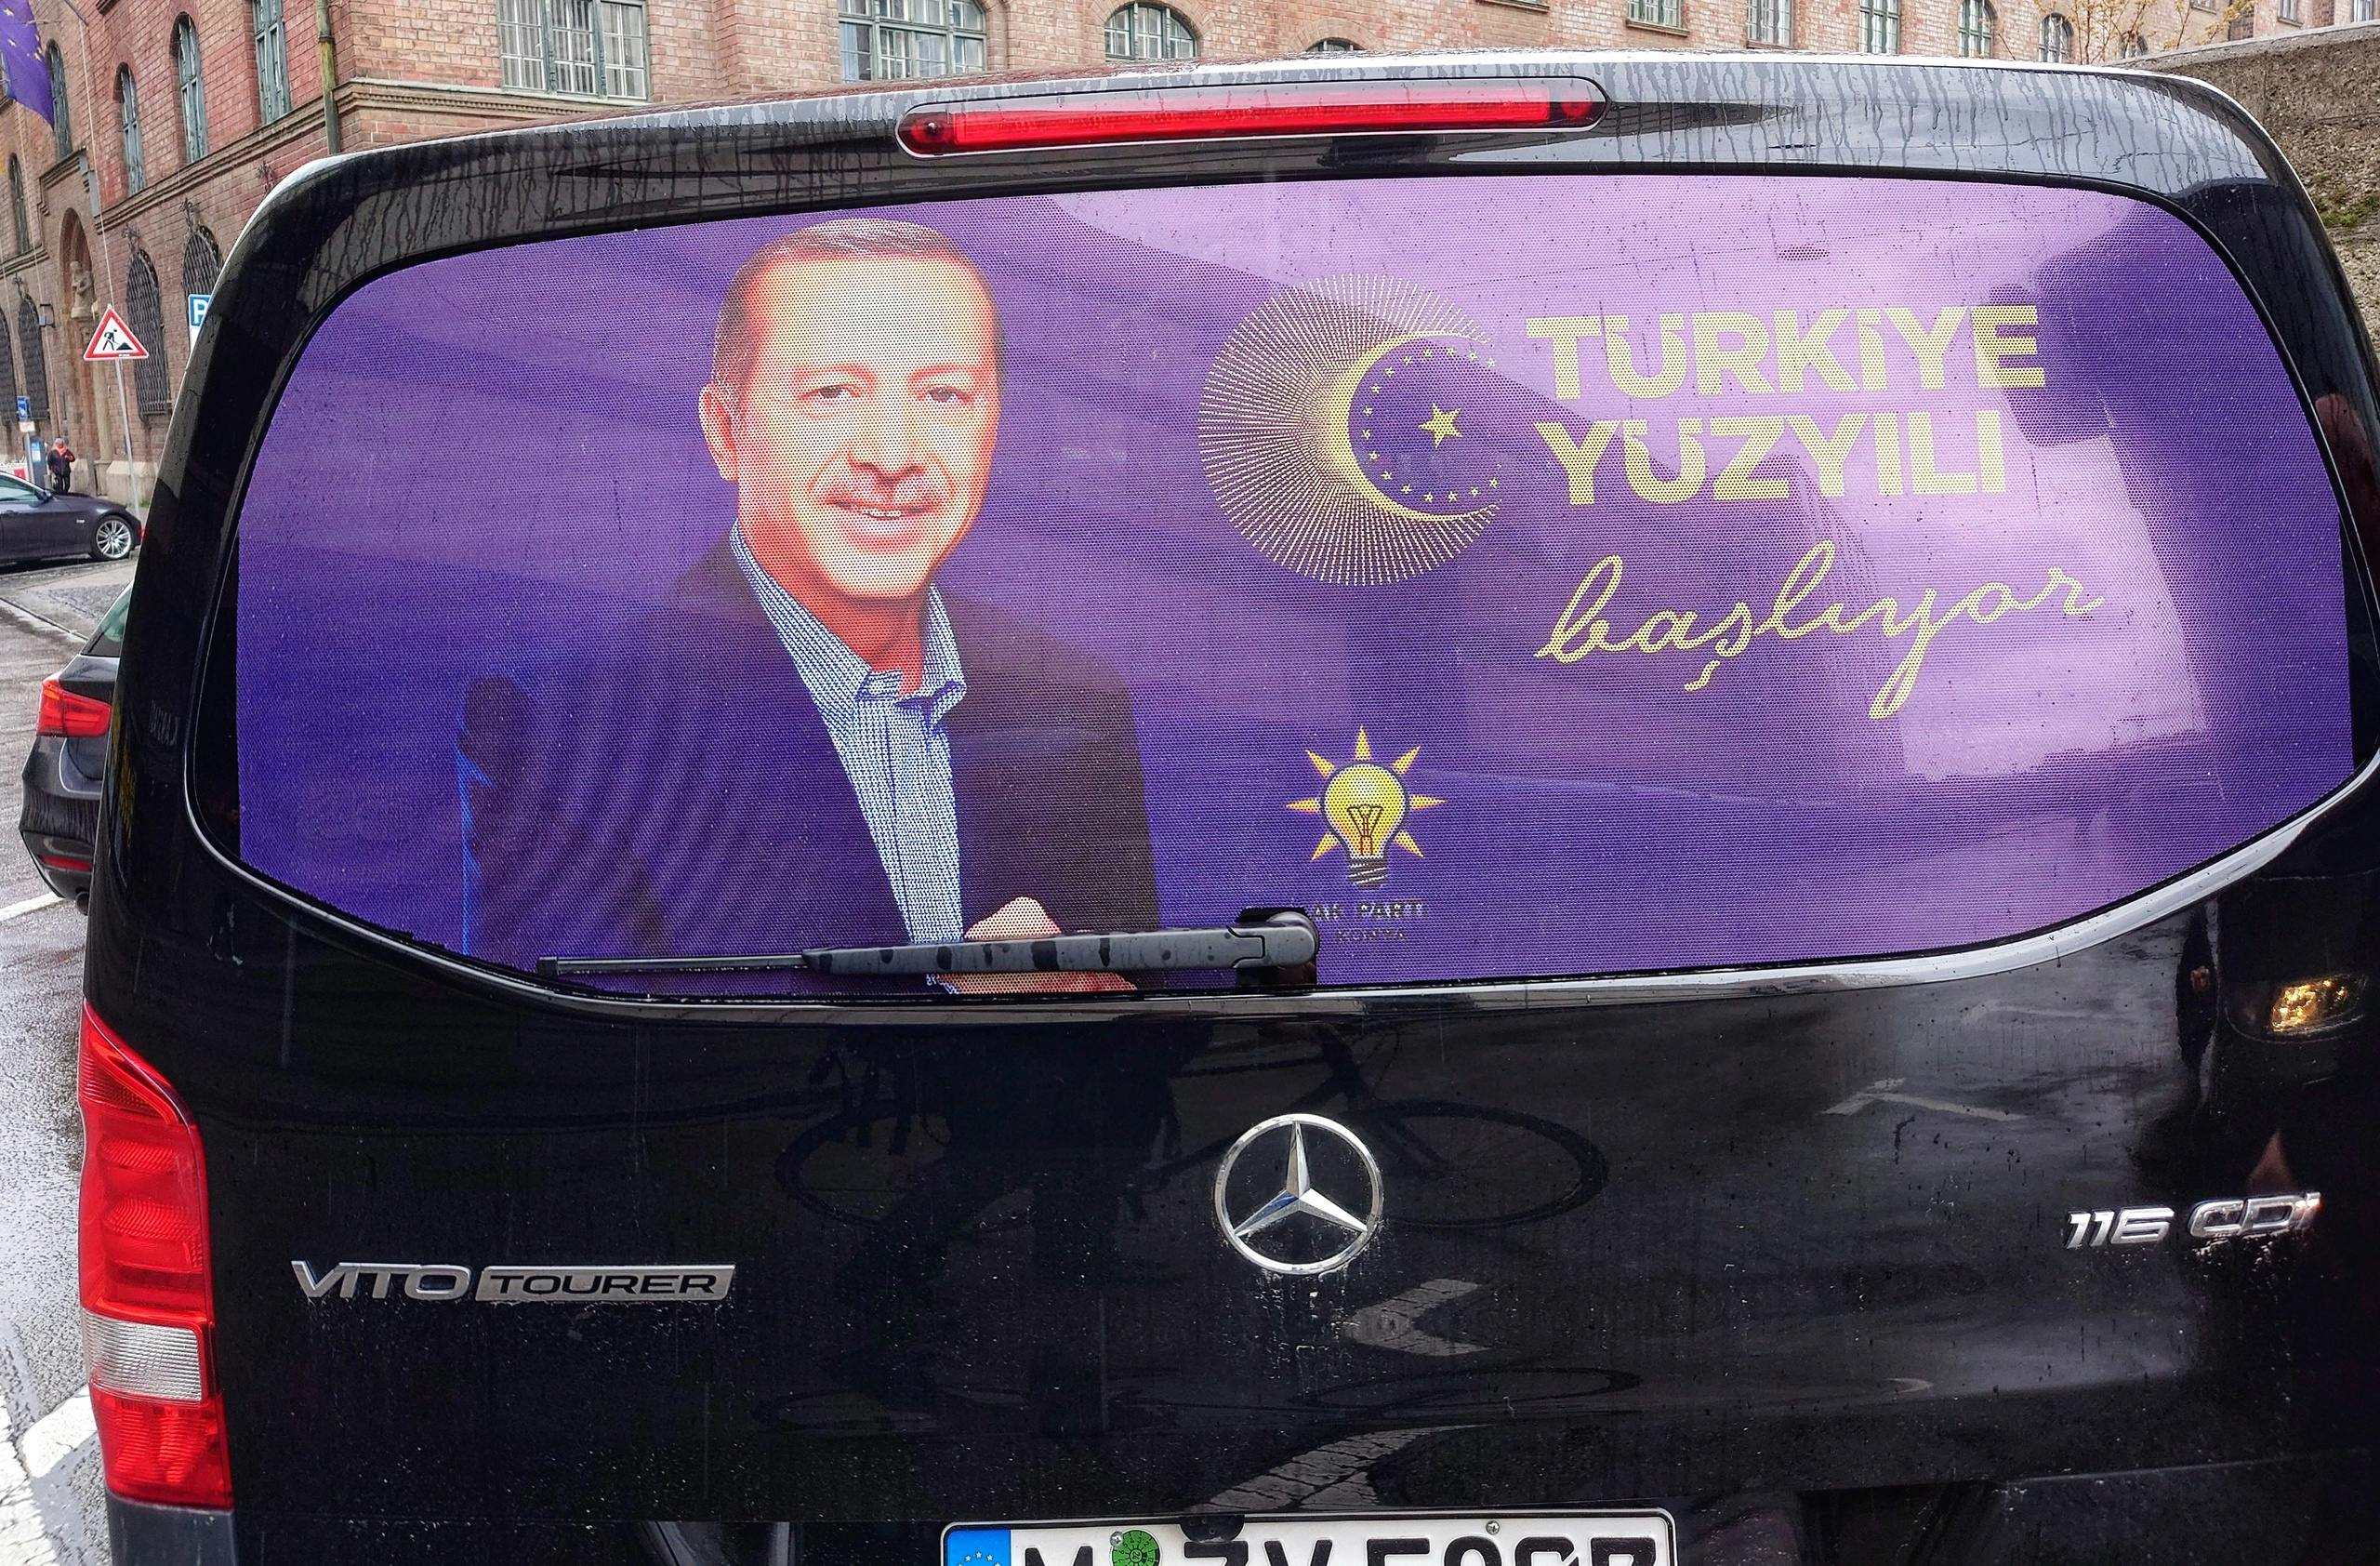 Erdogan is also trying to get the diaspora to vote for himself